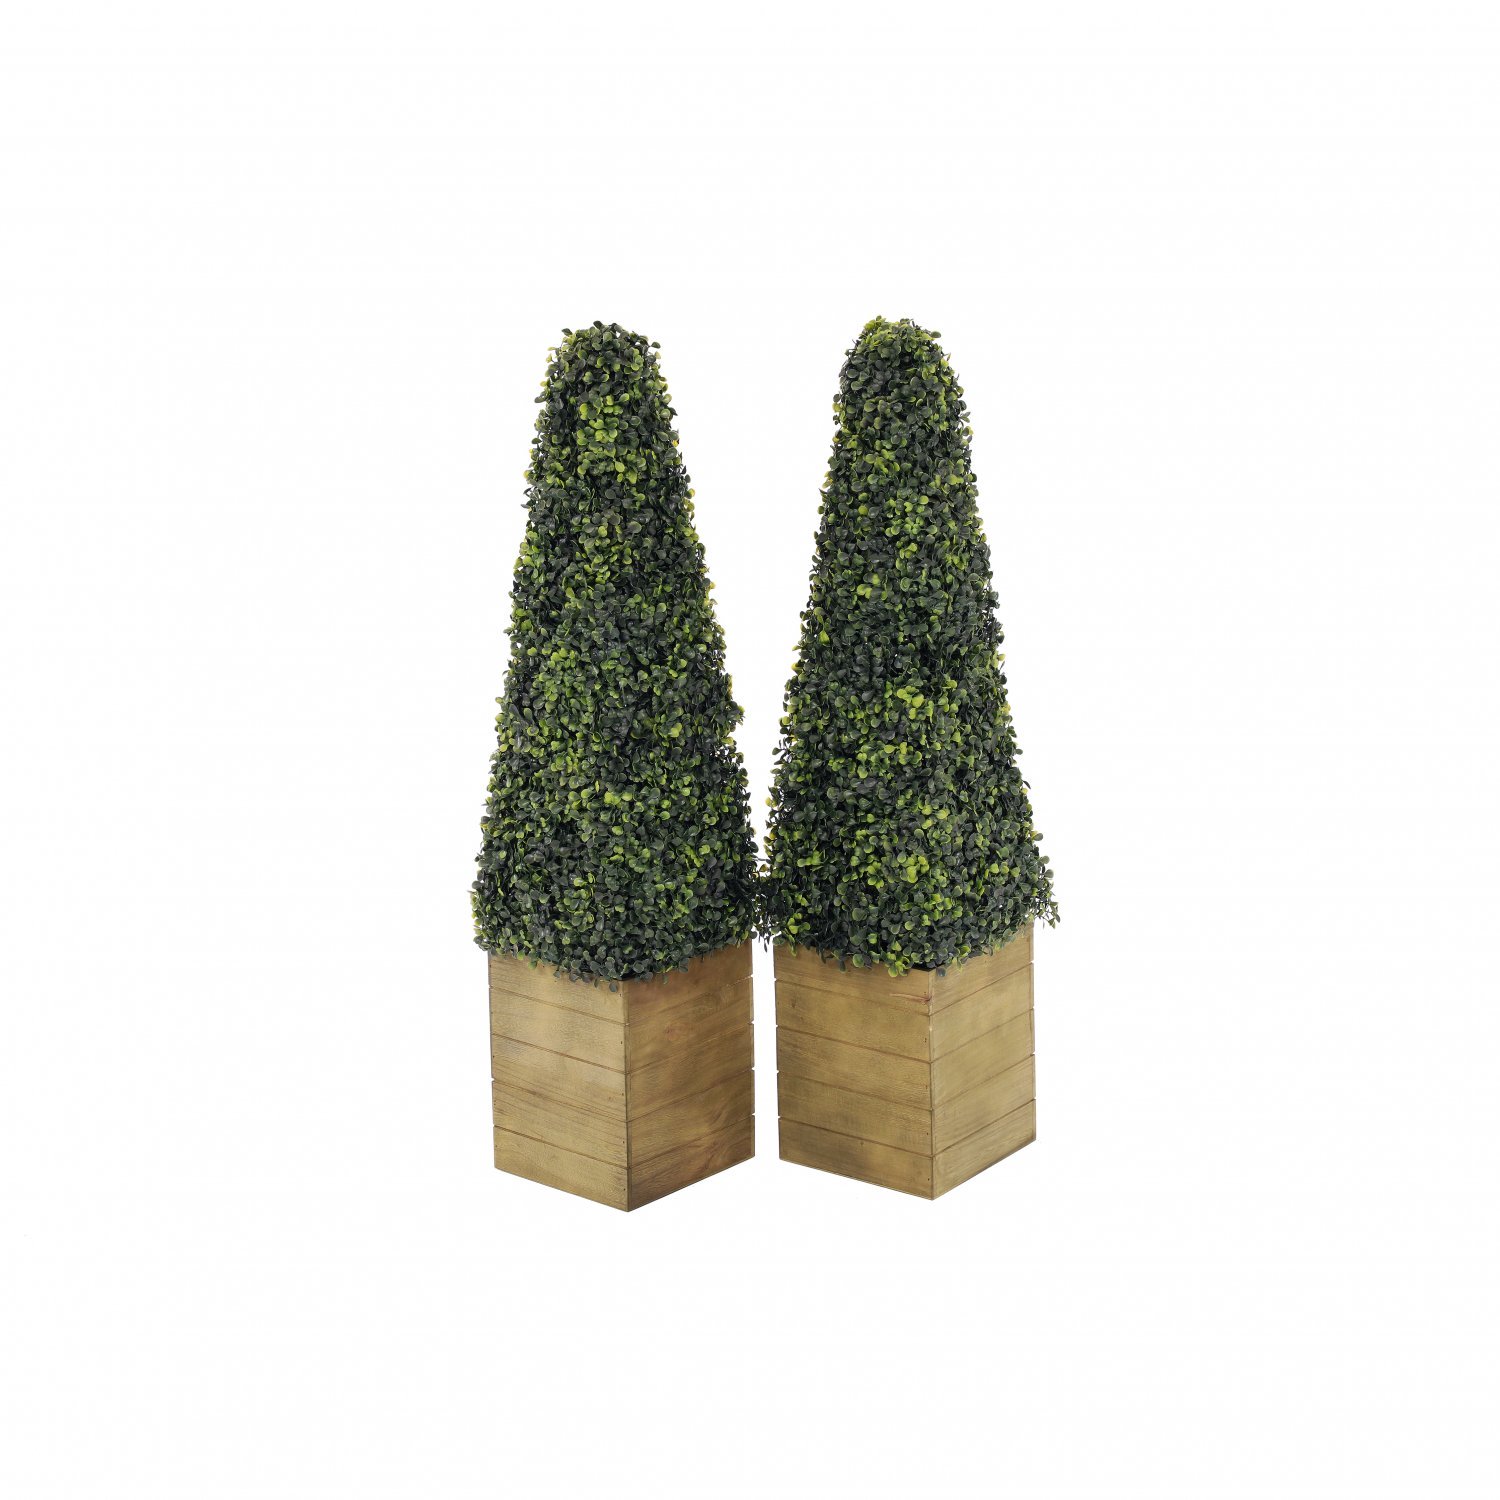 Set of 2 Artificial Topiary Boxwood Pyramid Trees 90cm Indoor Ou